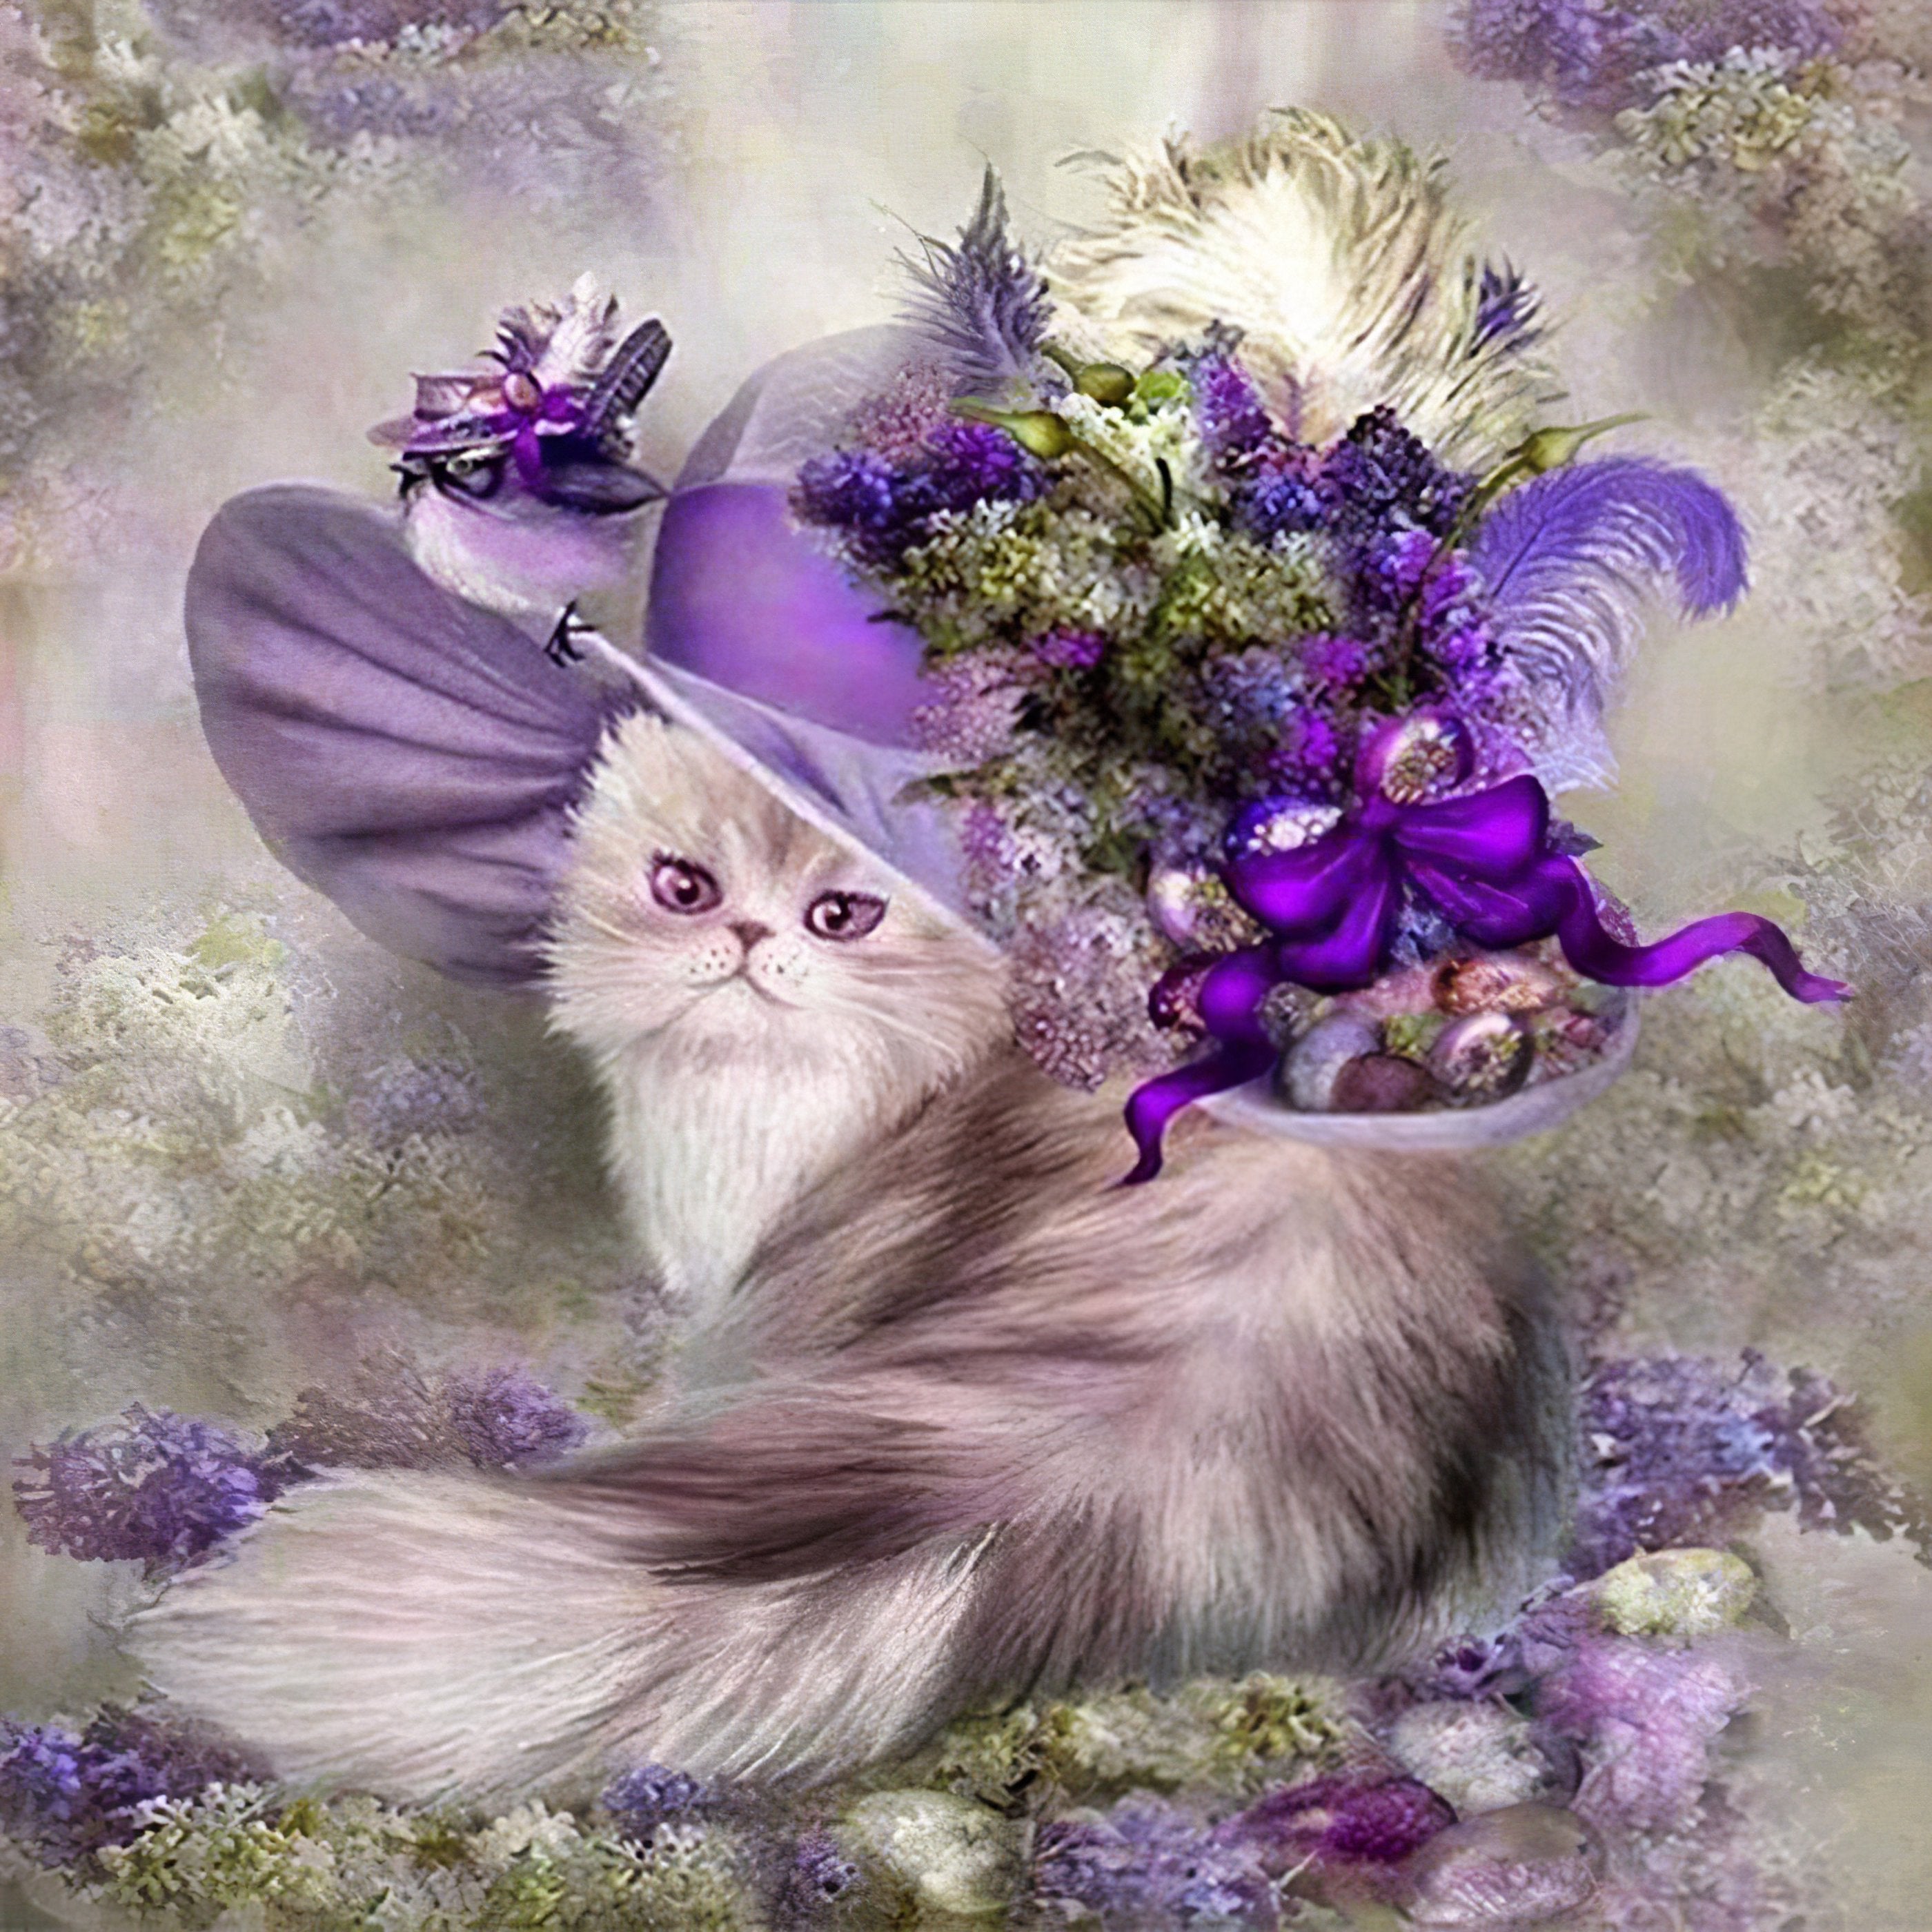 A whimsical depiction of a cat donning a hat, blending cuteness with a touch of elegance.Cat With A Hat - Diamondartlove